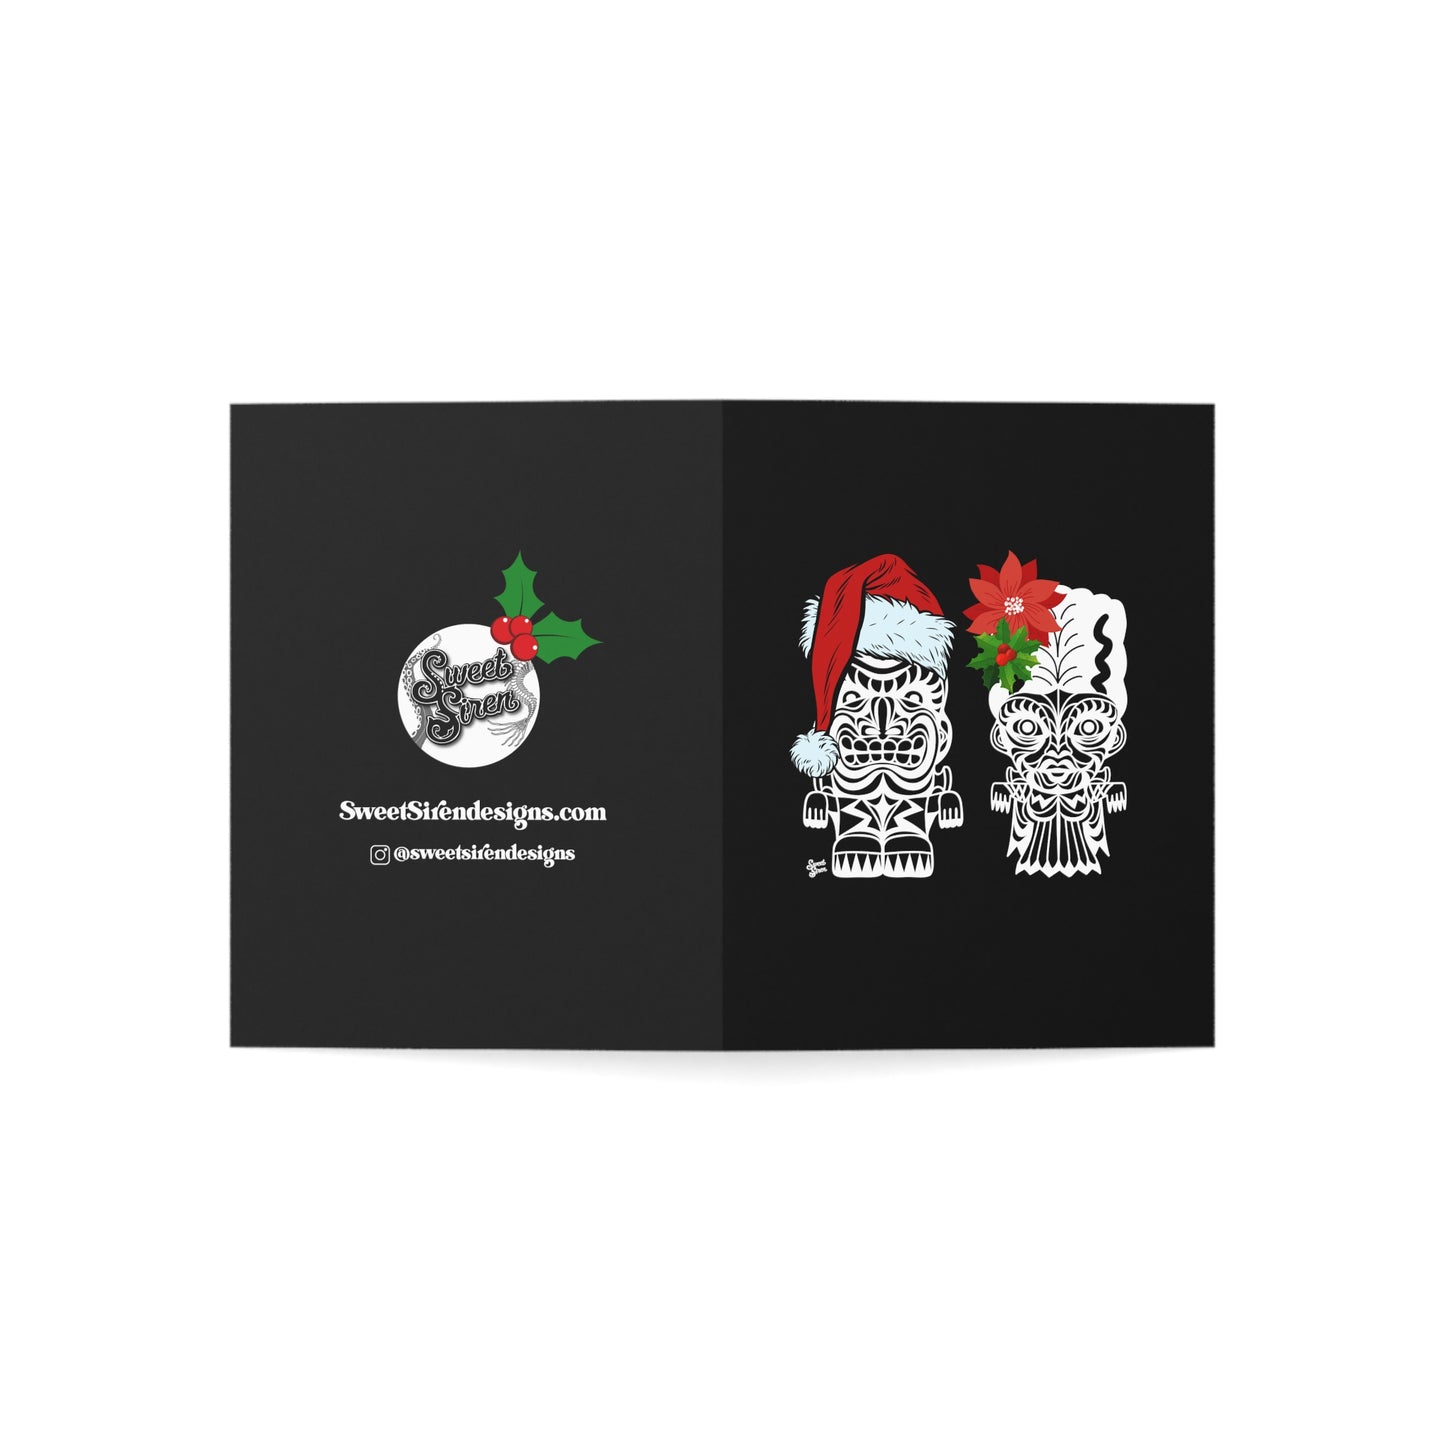 Holiday Franky & Bride Tiki Monsters  - Greeting Cards (1, 10, 30, and 50pcs) - CLASSIC Inside